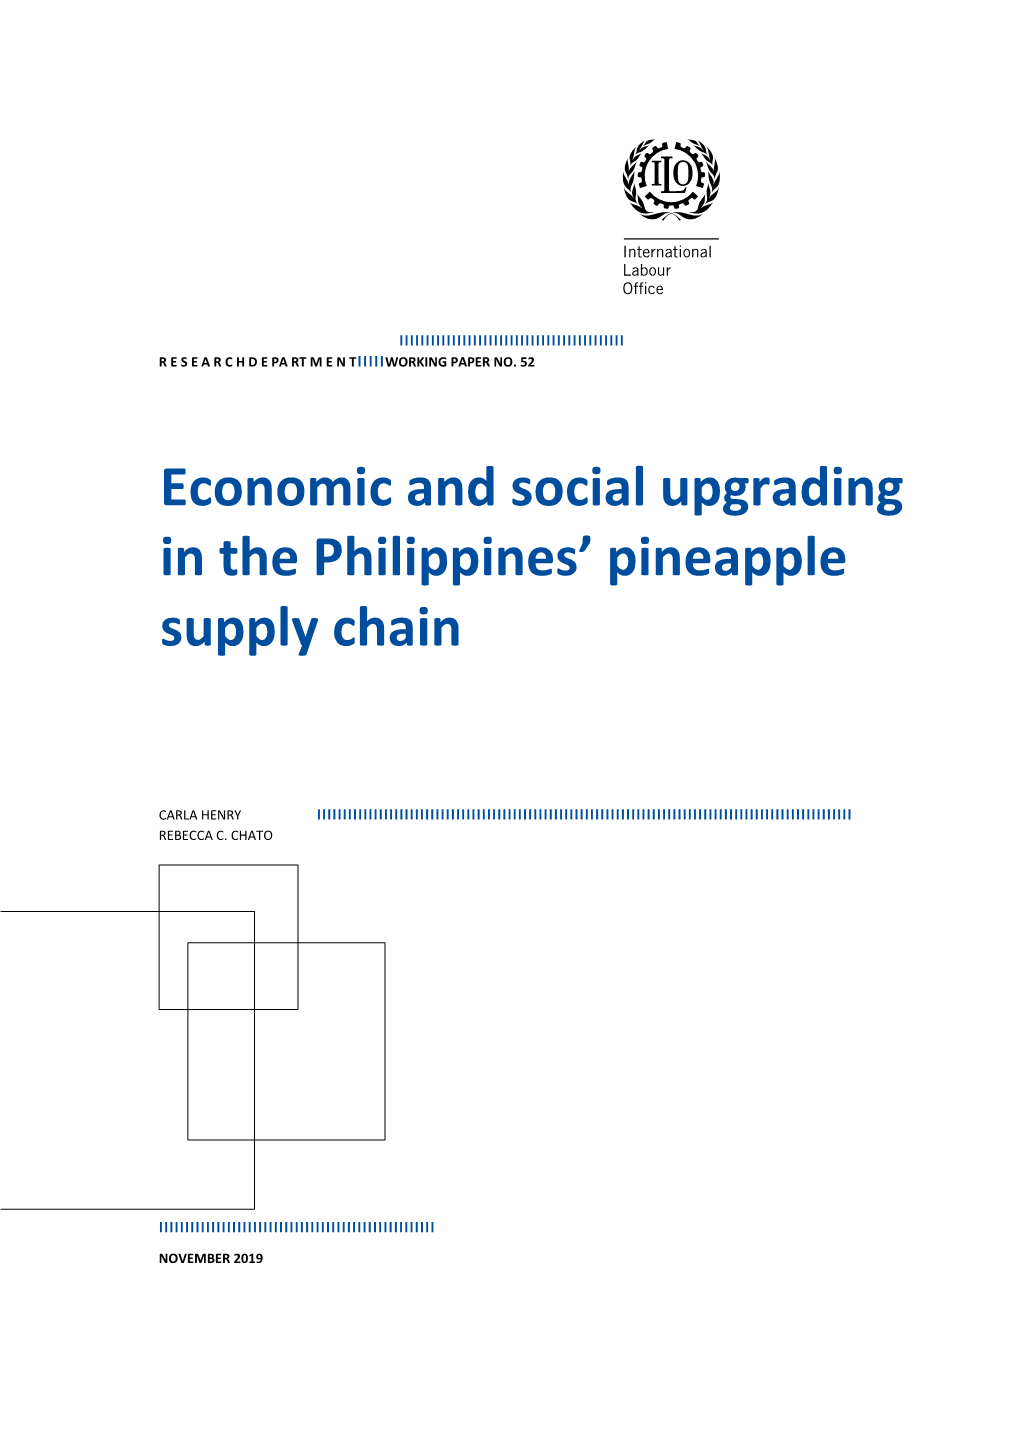 Economic and Social Upgrading in the Philippines' Pineapple Supply Chain